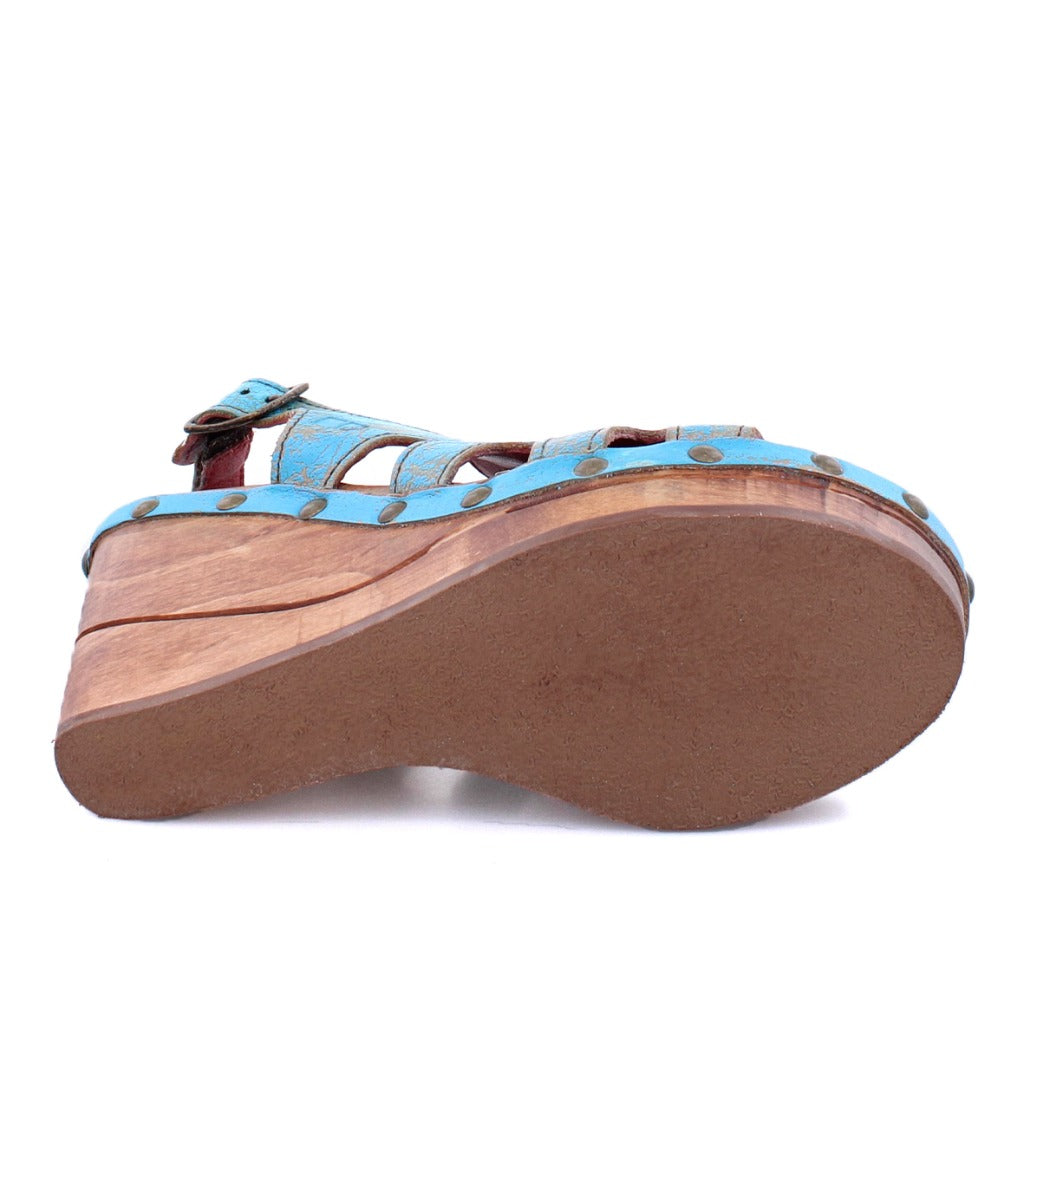 A pair of Bed Stu Naiya women's blue sandals on a white background.